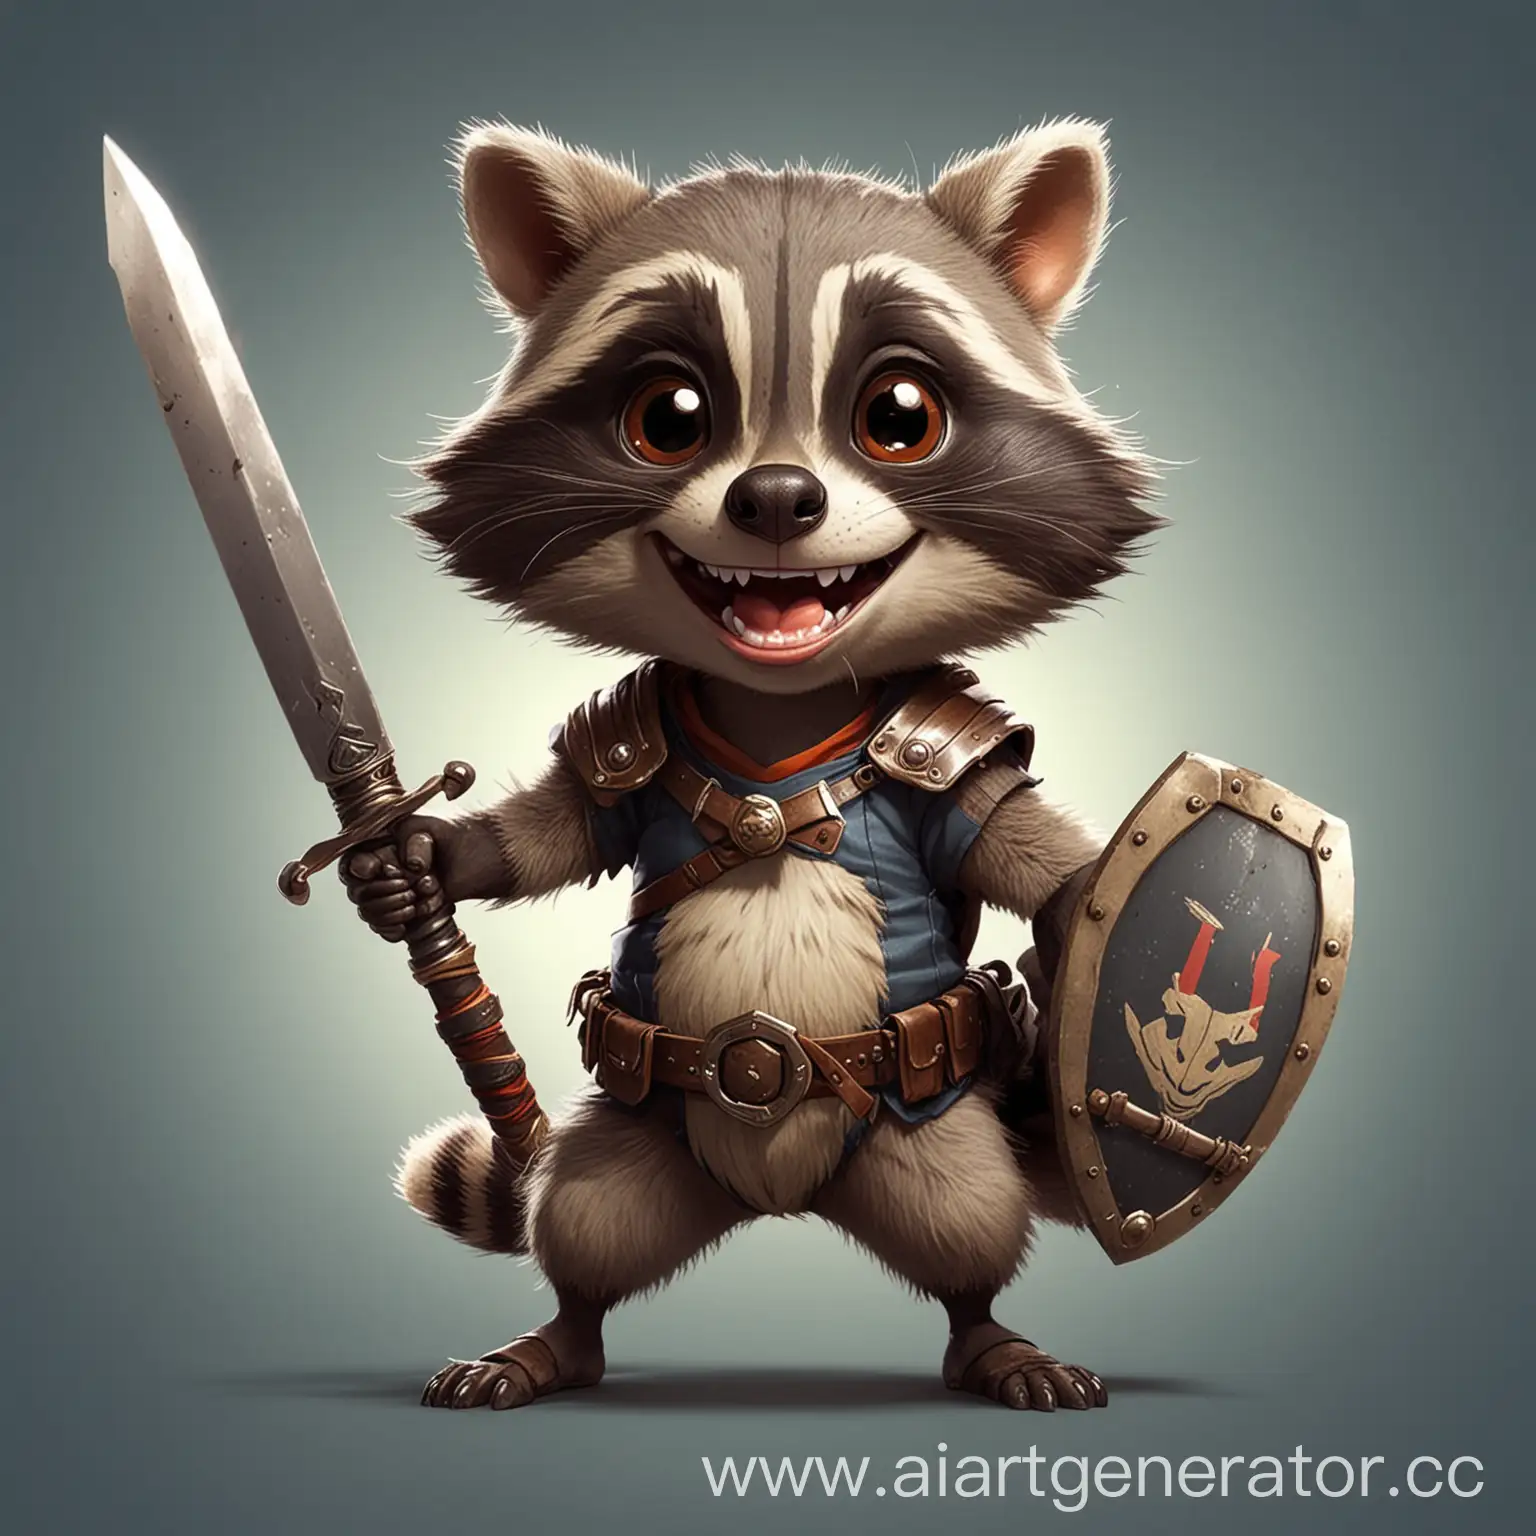 Create a picture of a raccoon standing on its hind legs, big smile, tongue out. in anime style and with a small sword and shield in its paws.